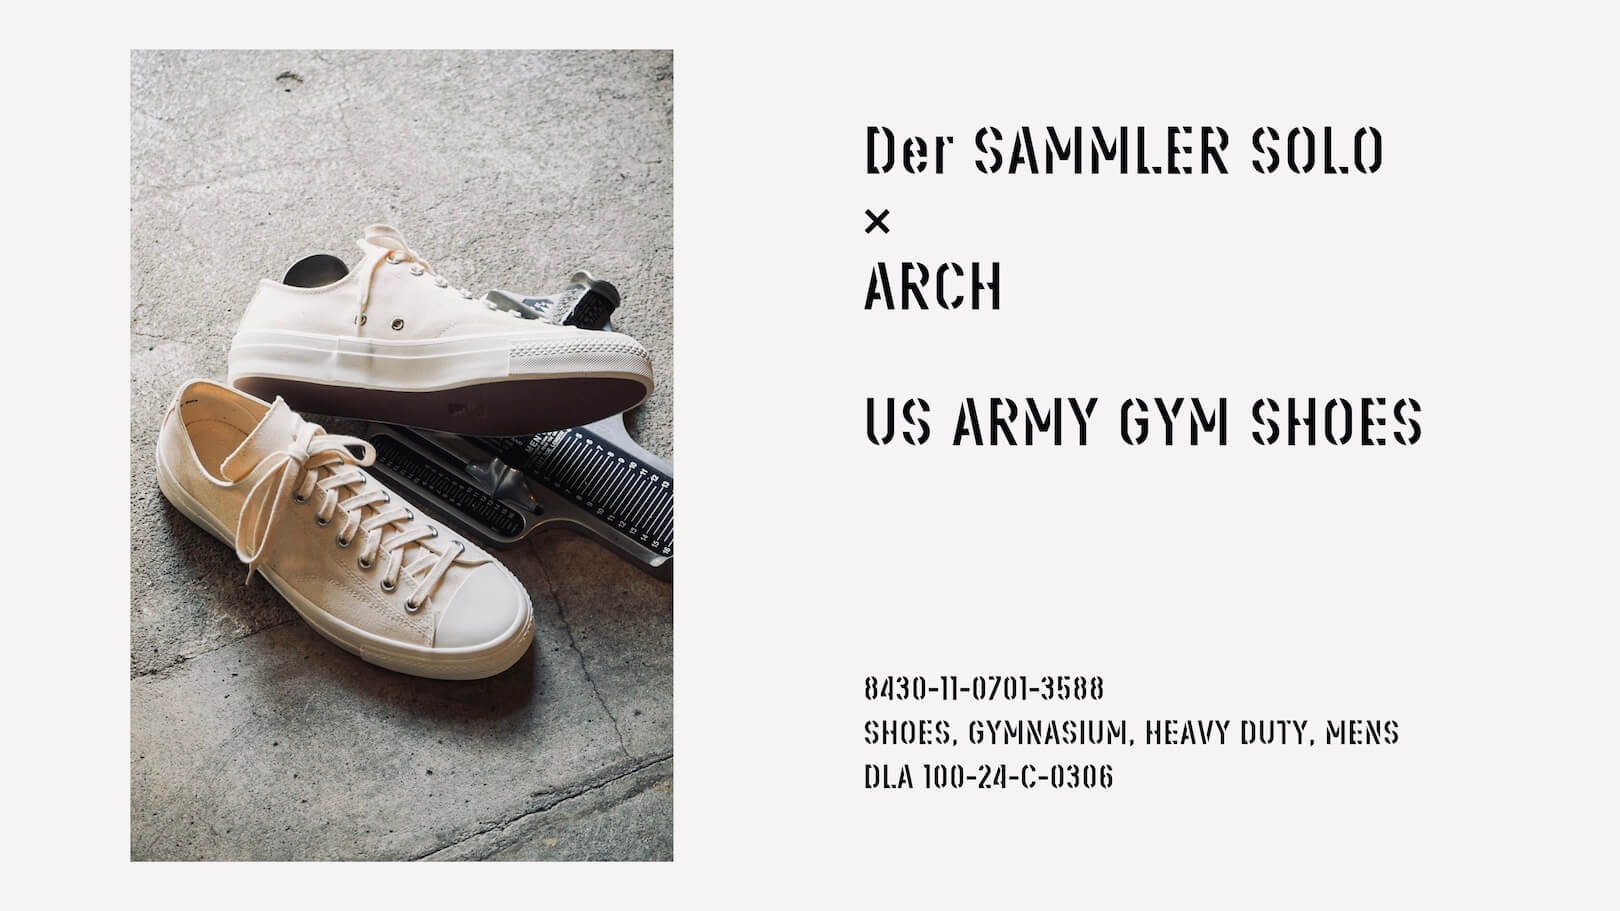 ARMY GYM SHOES